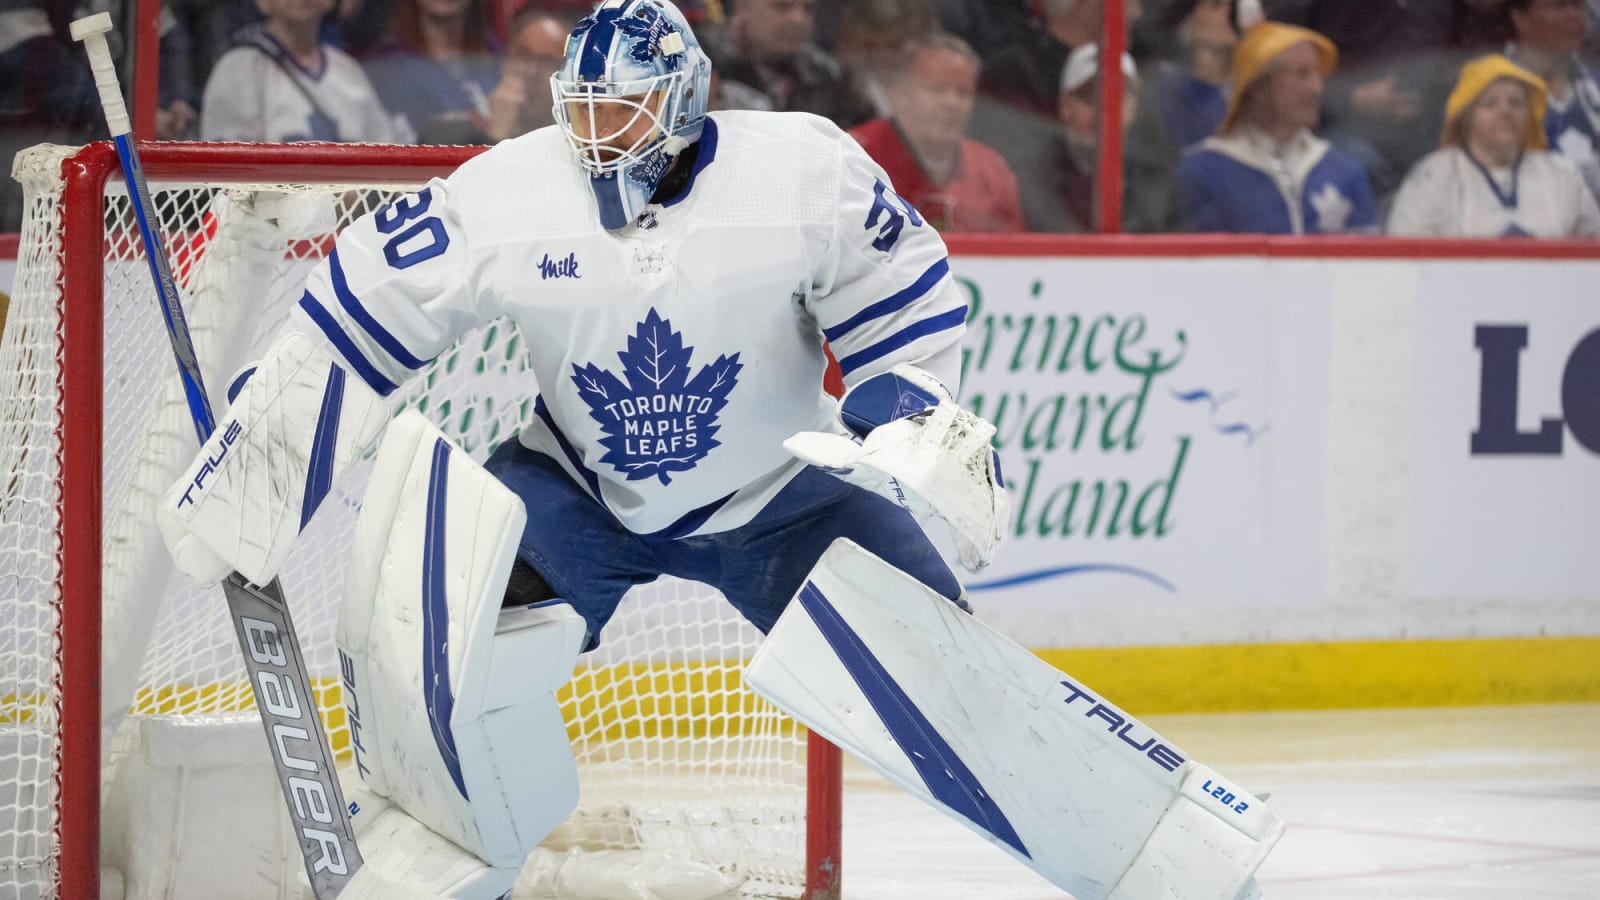 Toronto clinches playoff spot, Ryan Tverberg’s pro debut, and more: Marlies Weekly